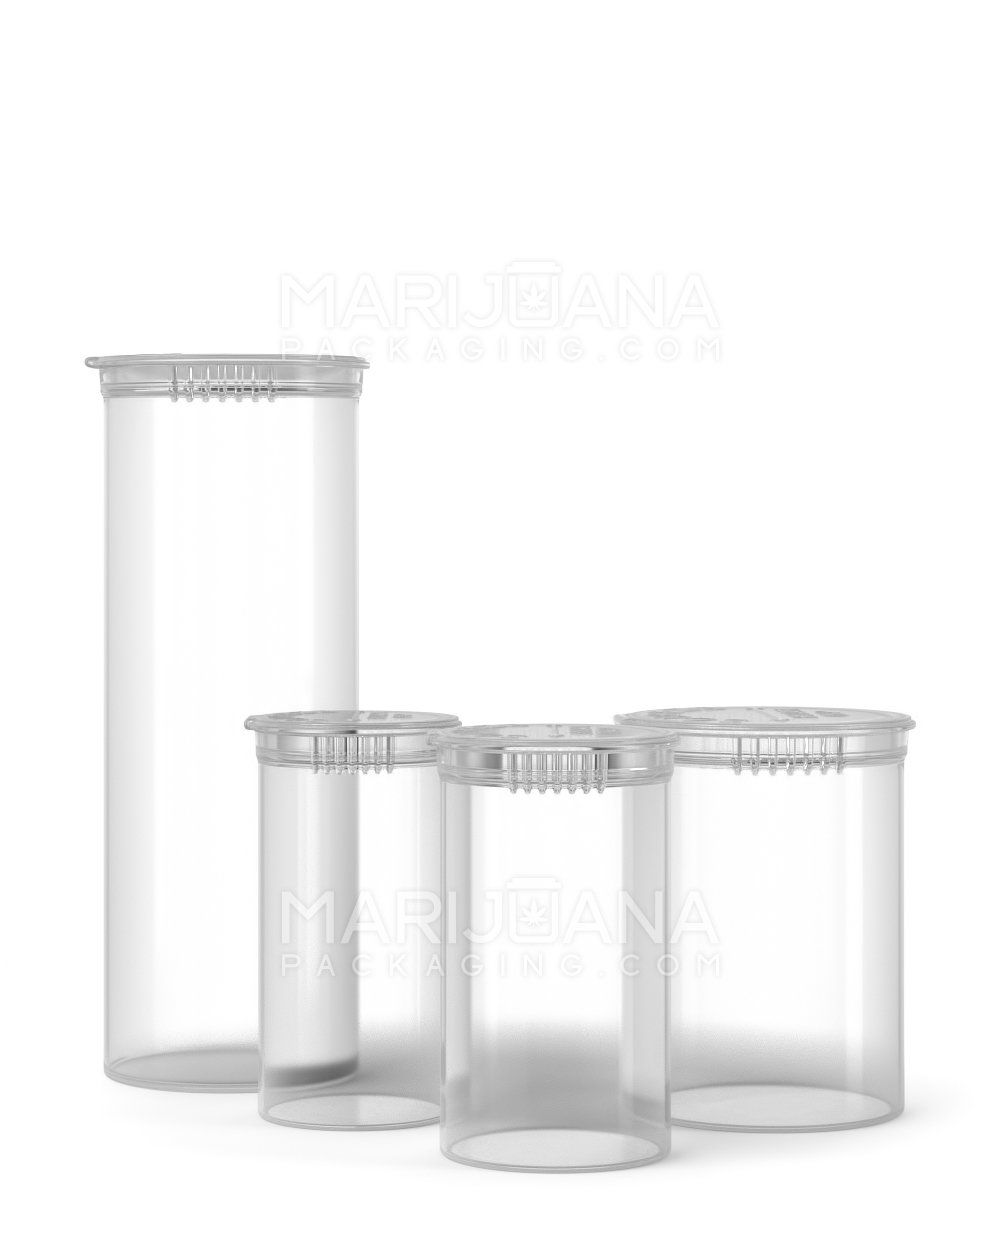 13 Dram CR Opaque White 2g Biodegradable Pop Top Container